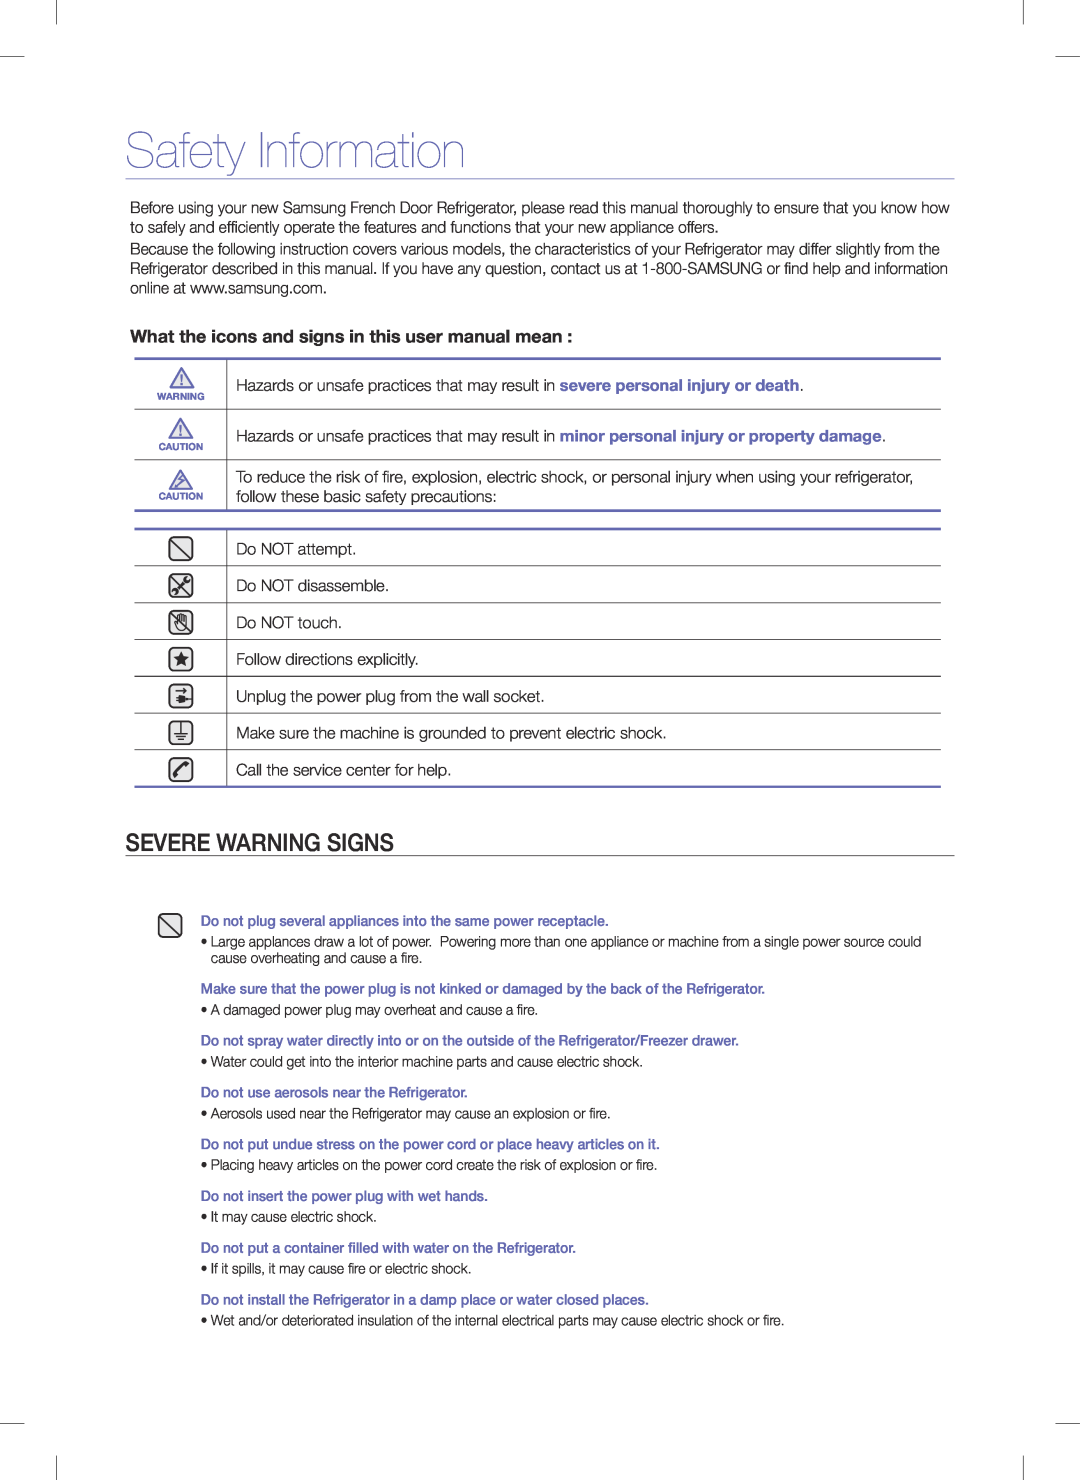 Samsung RFG295AA quick start Safety Information, Severe Warning Signs, What the icons and signs in this user manual mean 